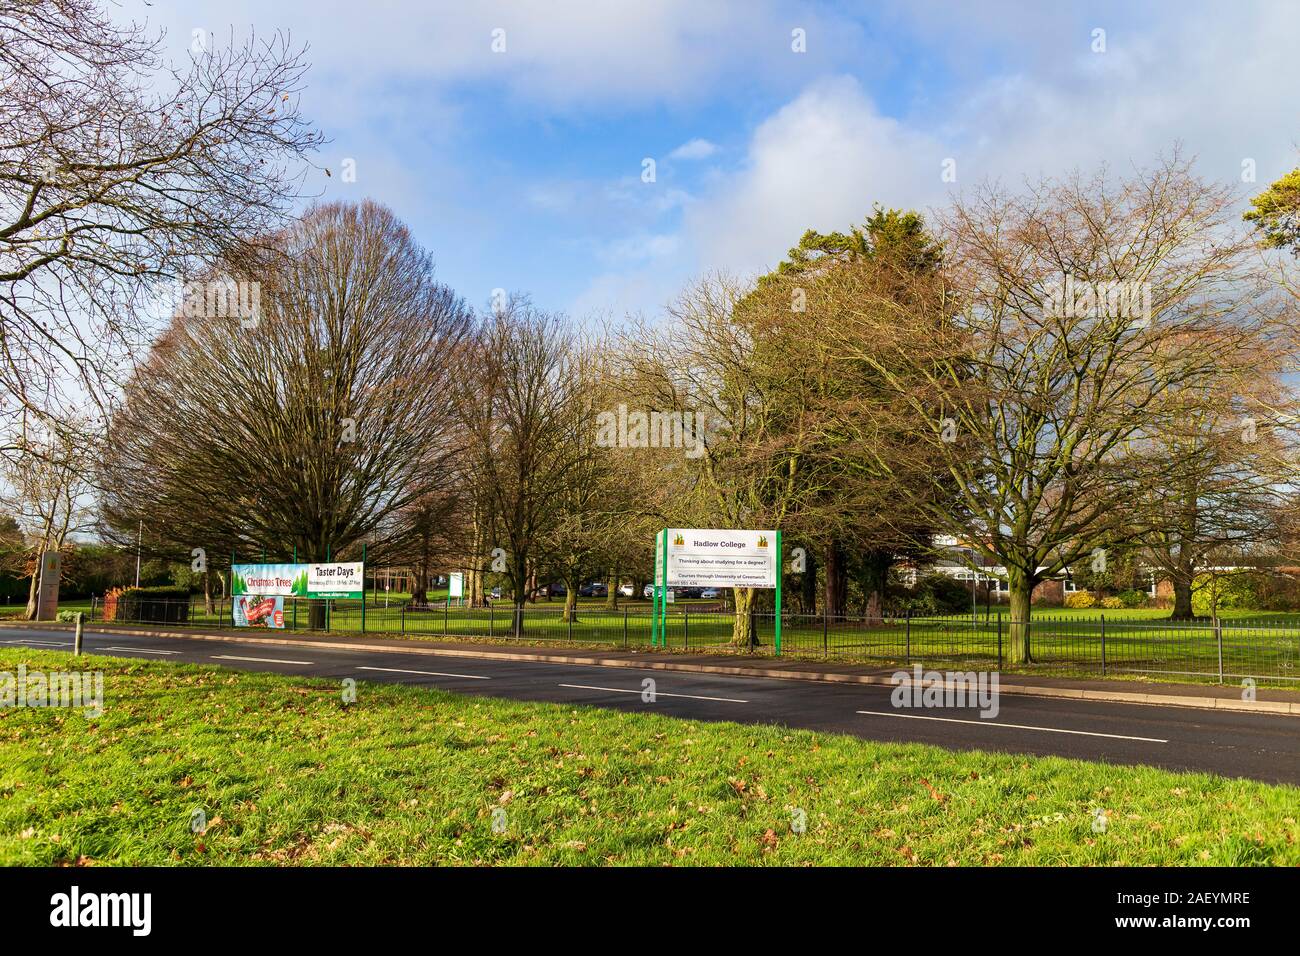 The Entrance to Hadlow College, a land based college in the heart of Kent, Hadlow, UK Stock Photo